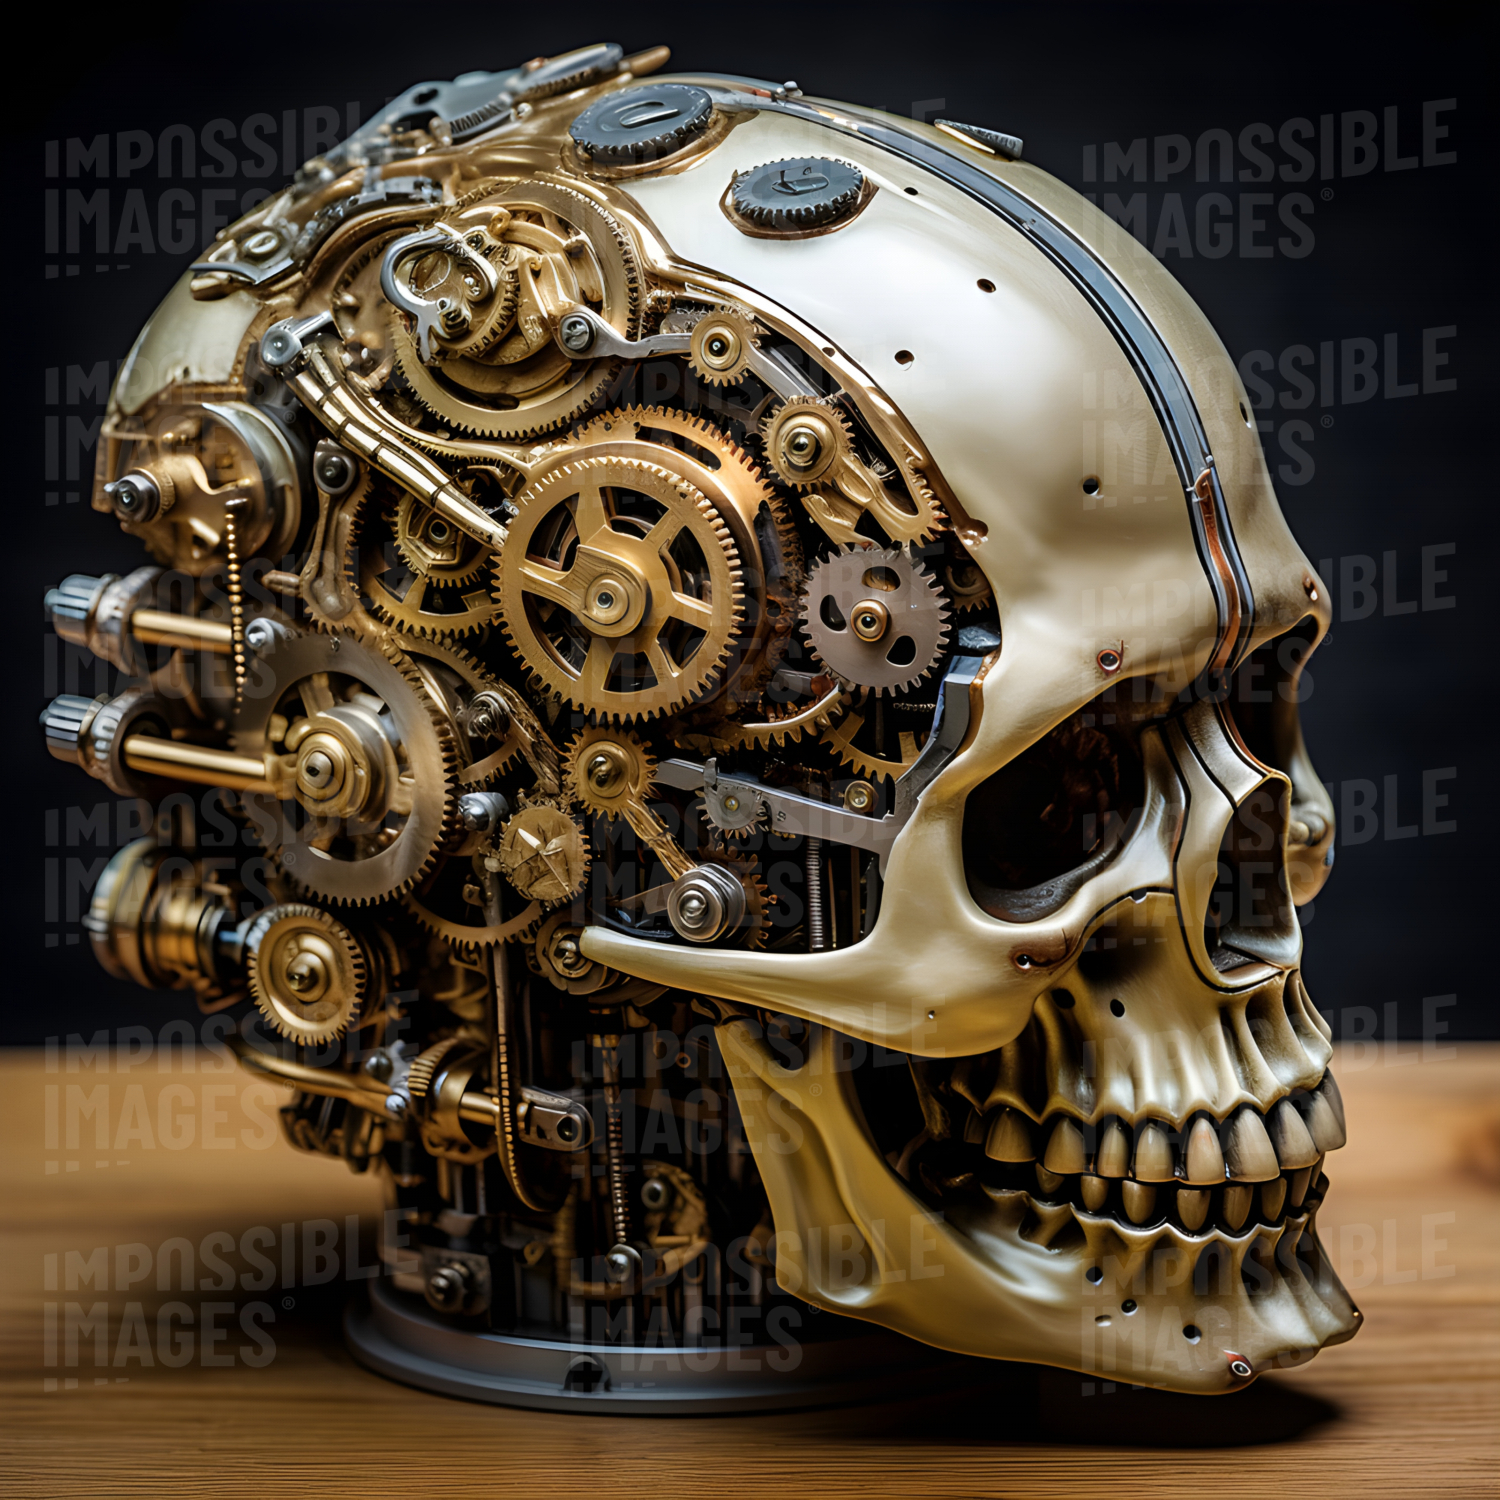 Ornate model of a stylised human skull with complex clockwork inside